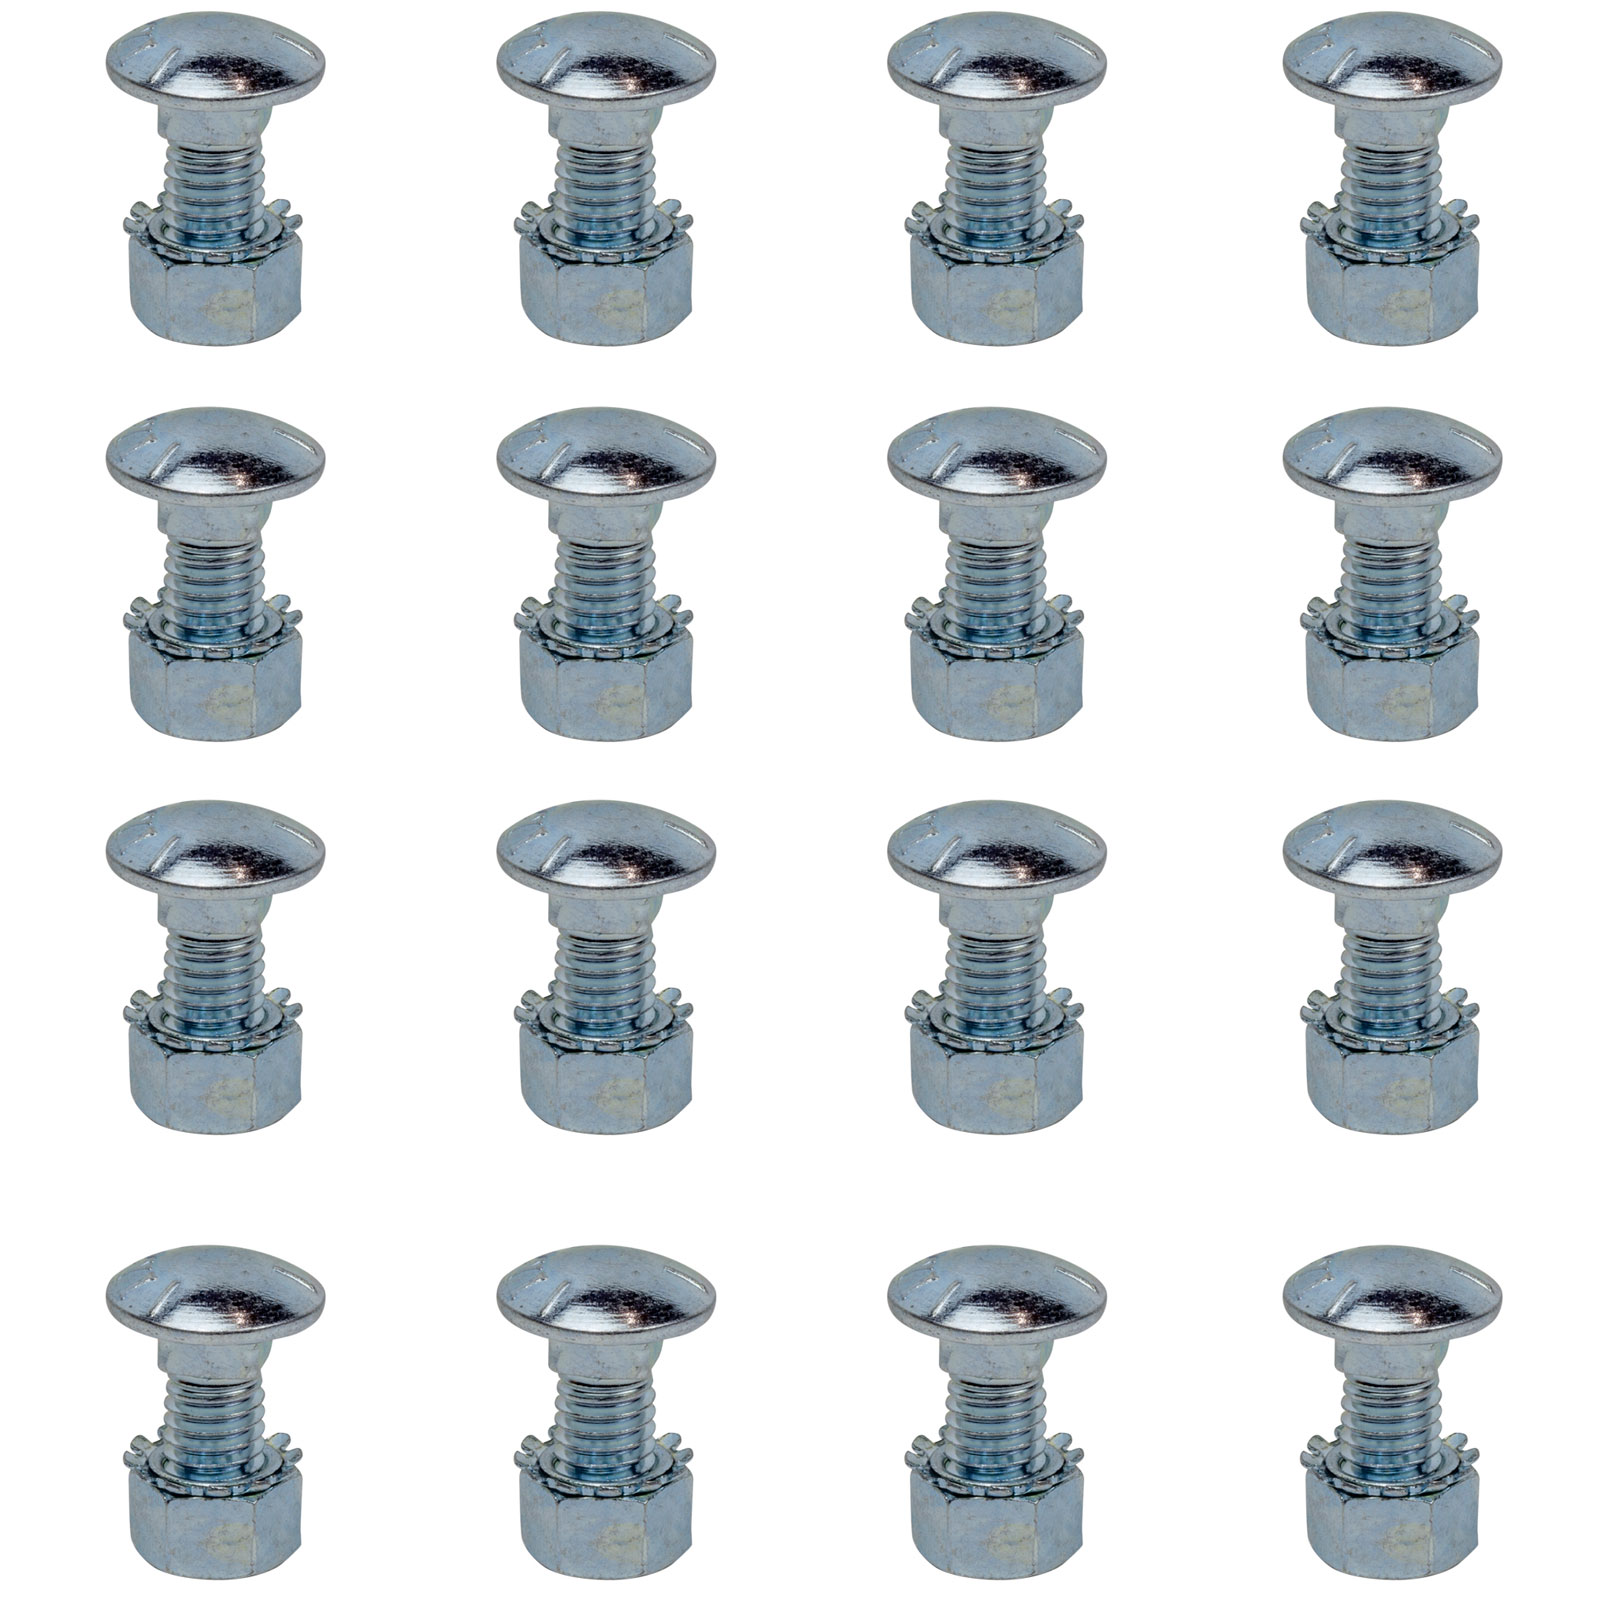 Product Nuts and Bolts (16 each)